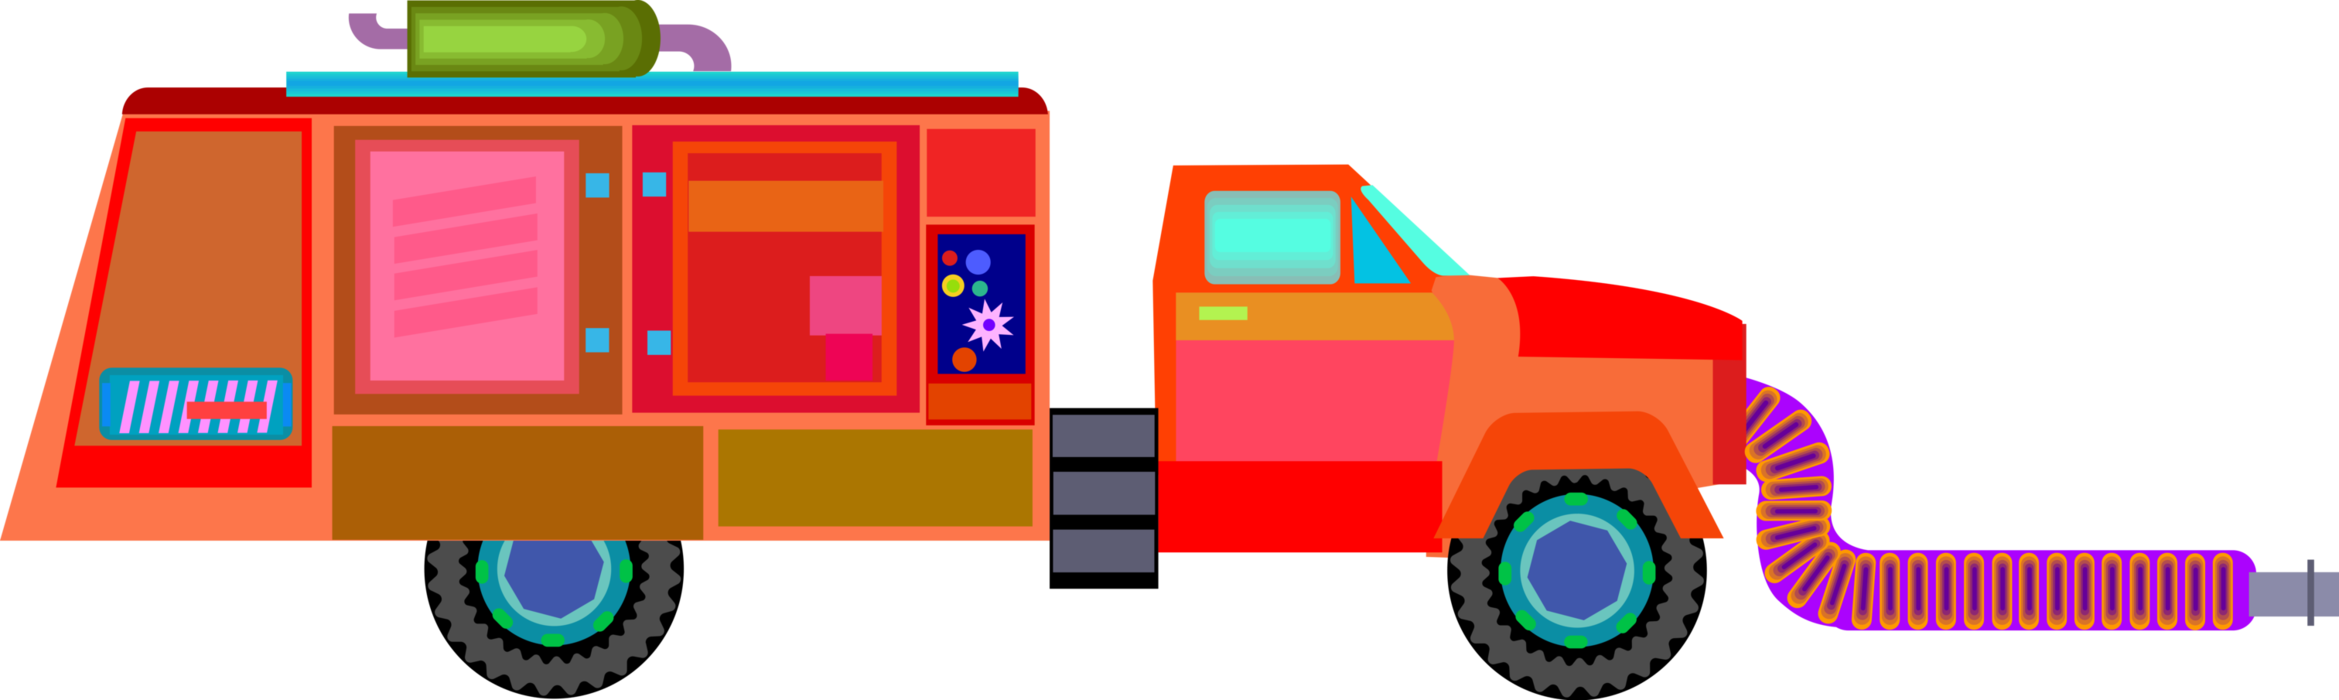 Vector Illustration of Fire Engine or Fire Truck Vehicle Designed for Firefighting Operations and Emergency Services